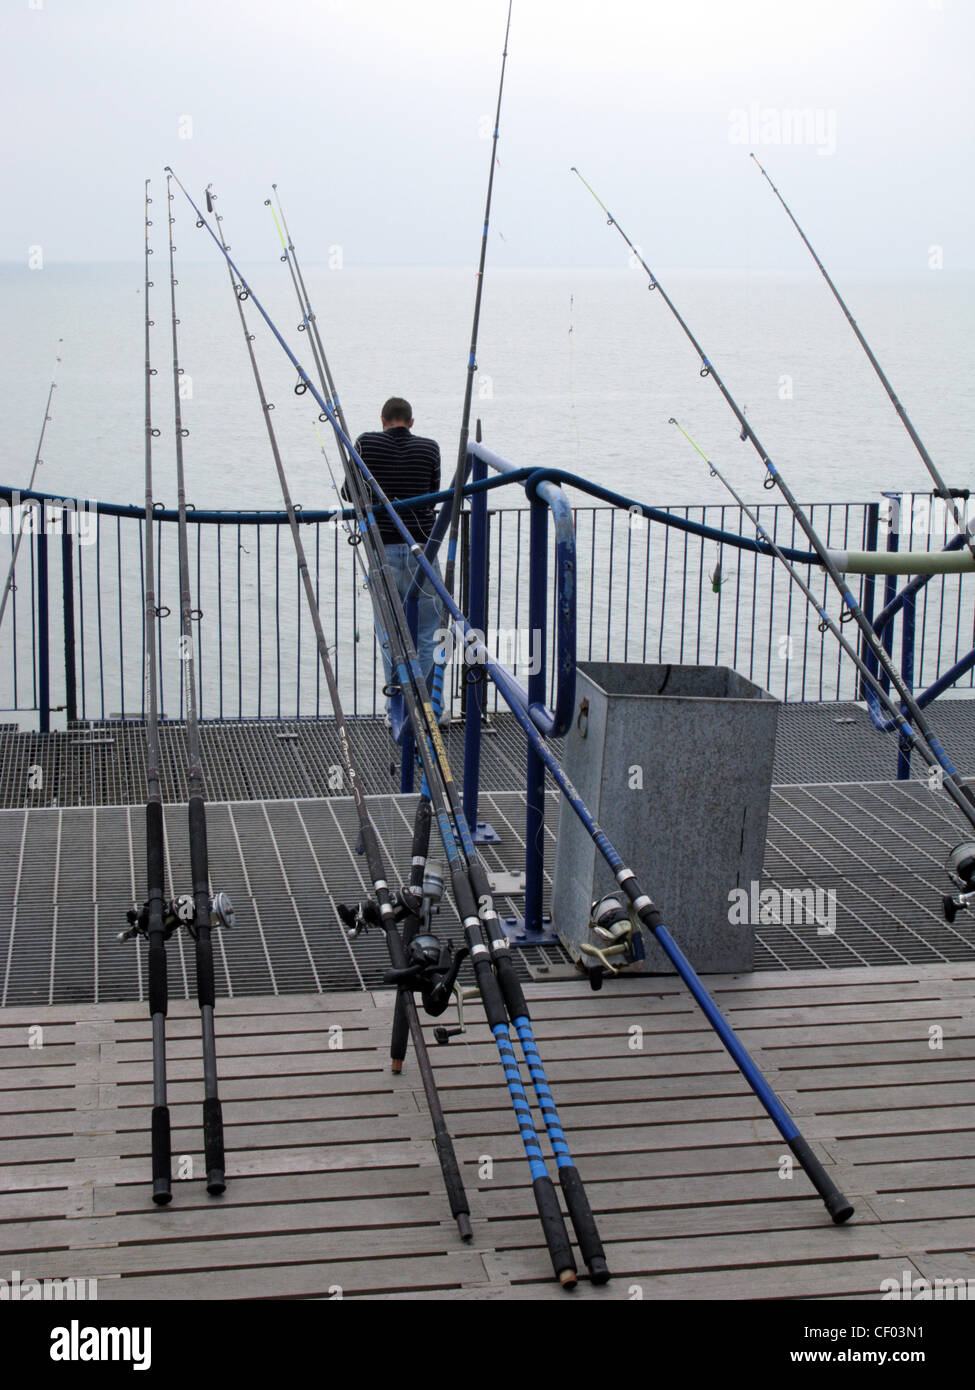 https://c8.alamy.com/comp/CF03N1/sea-angling-an-angler-with-lots-of-fishing-rods-on-the-pier-at-eastbourne-CF03N1.jpg